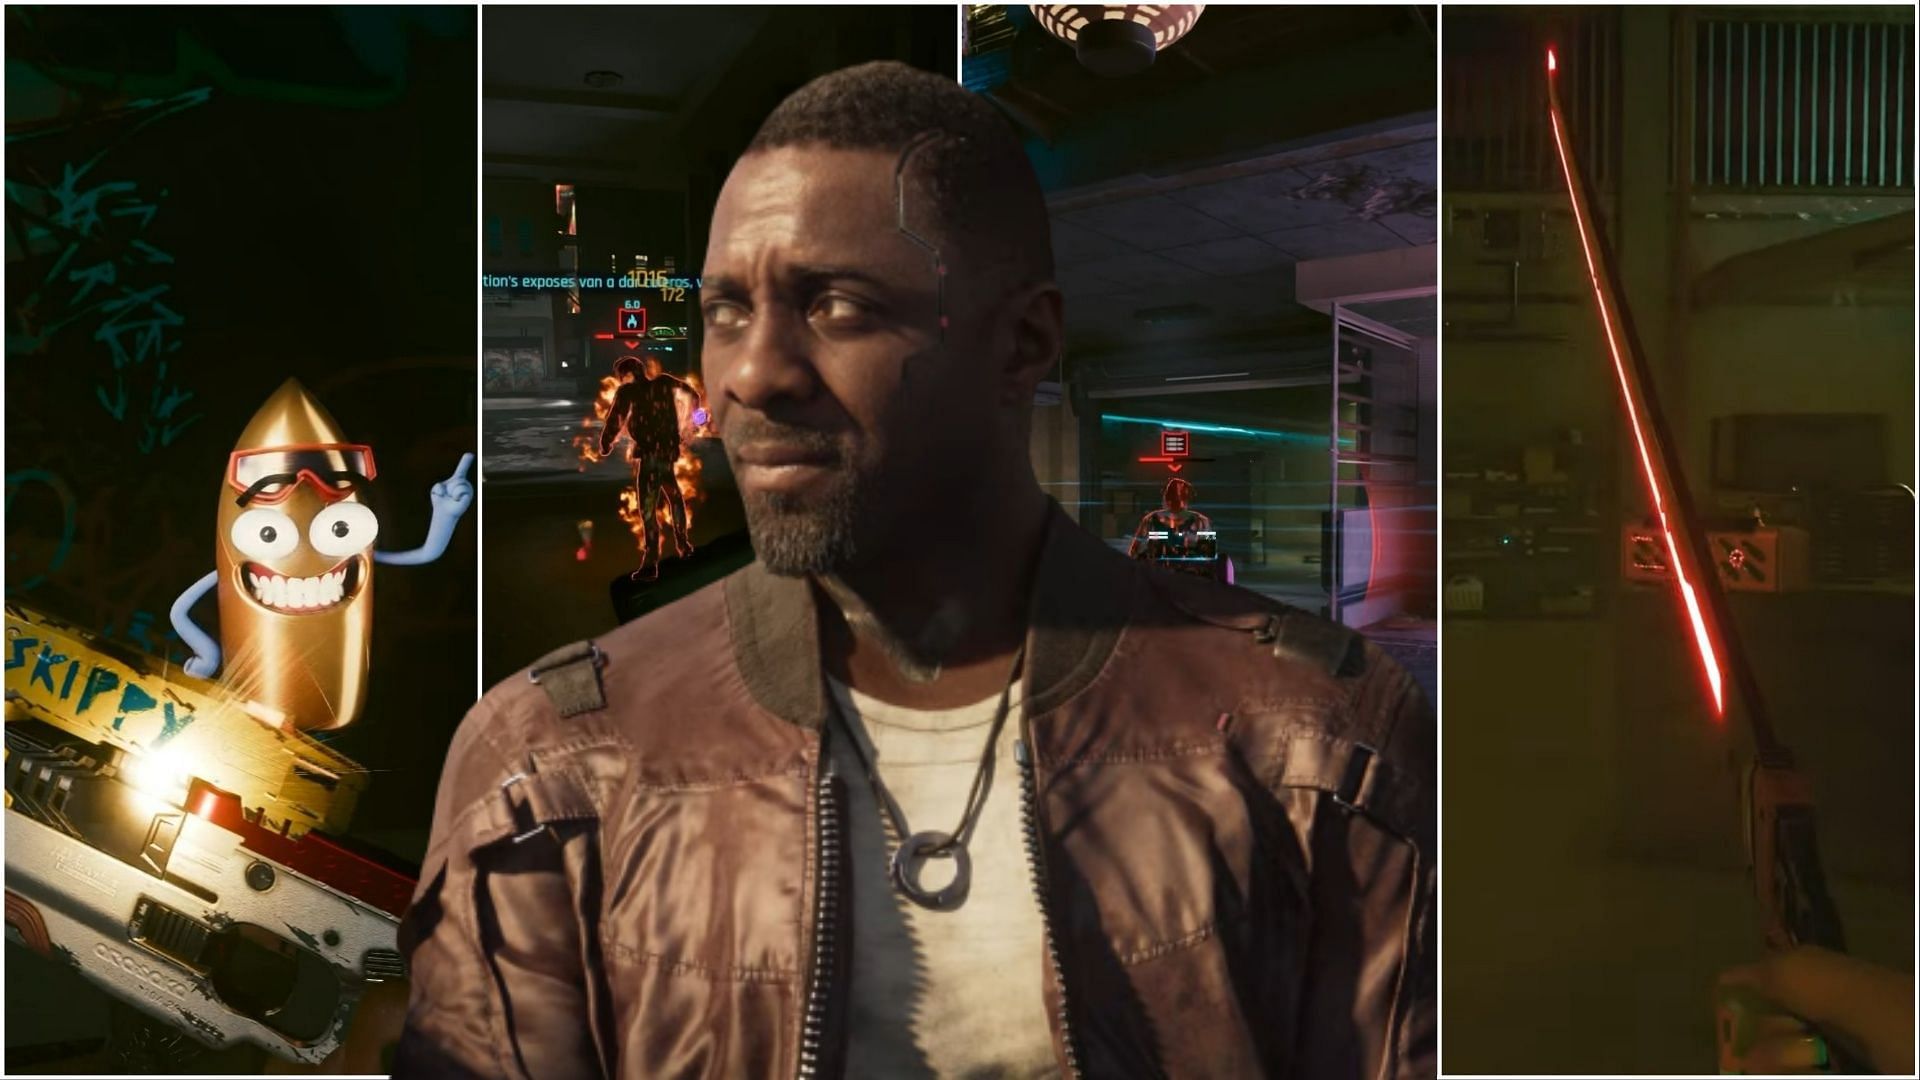 Solomon Reed and the various weaponry of Cyberpunk 2077